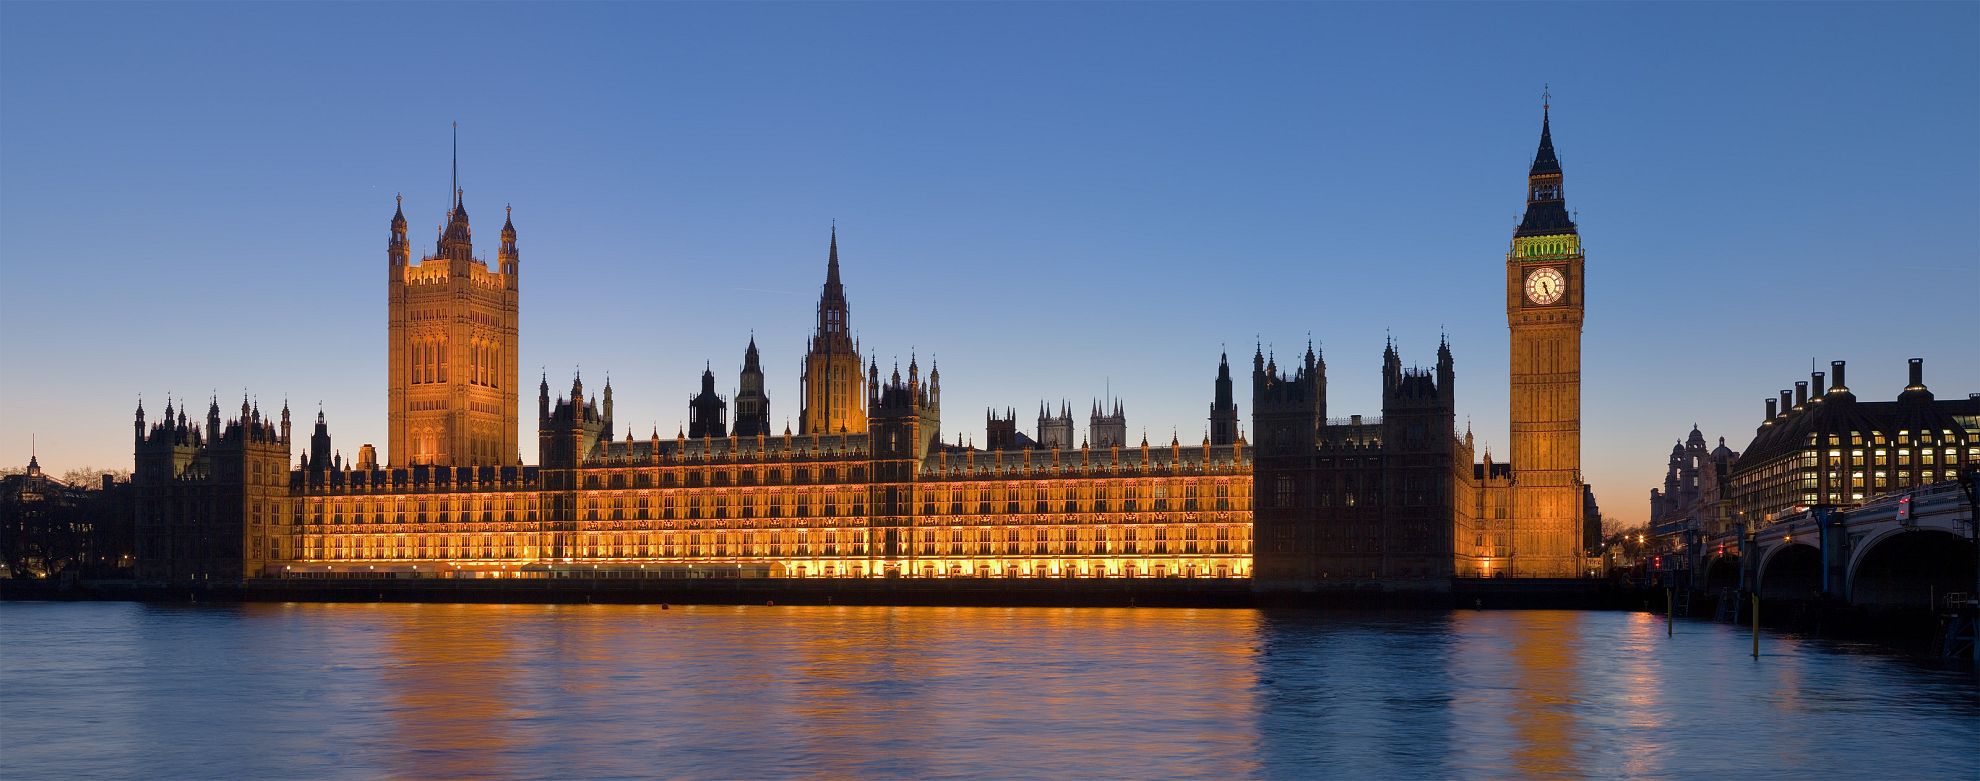 Latest News Access smc will present at the houses of parliament